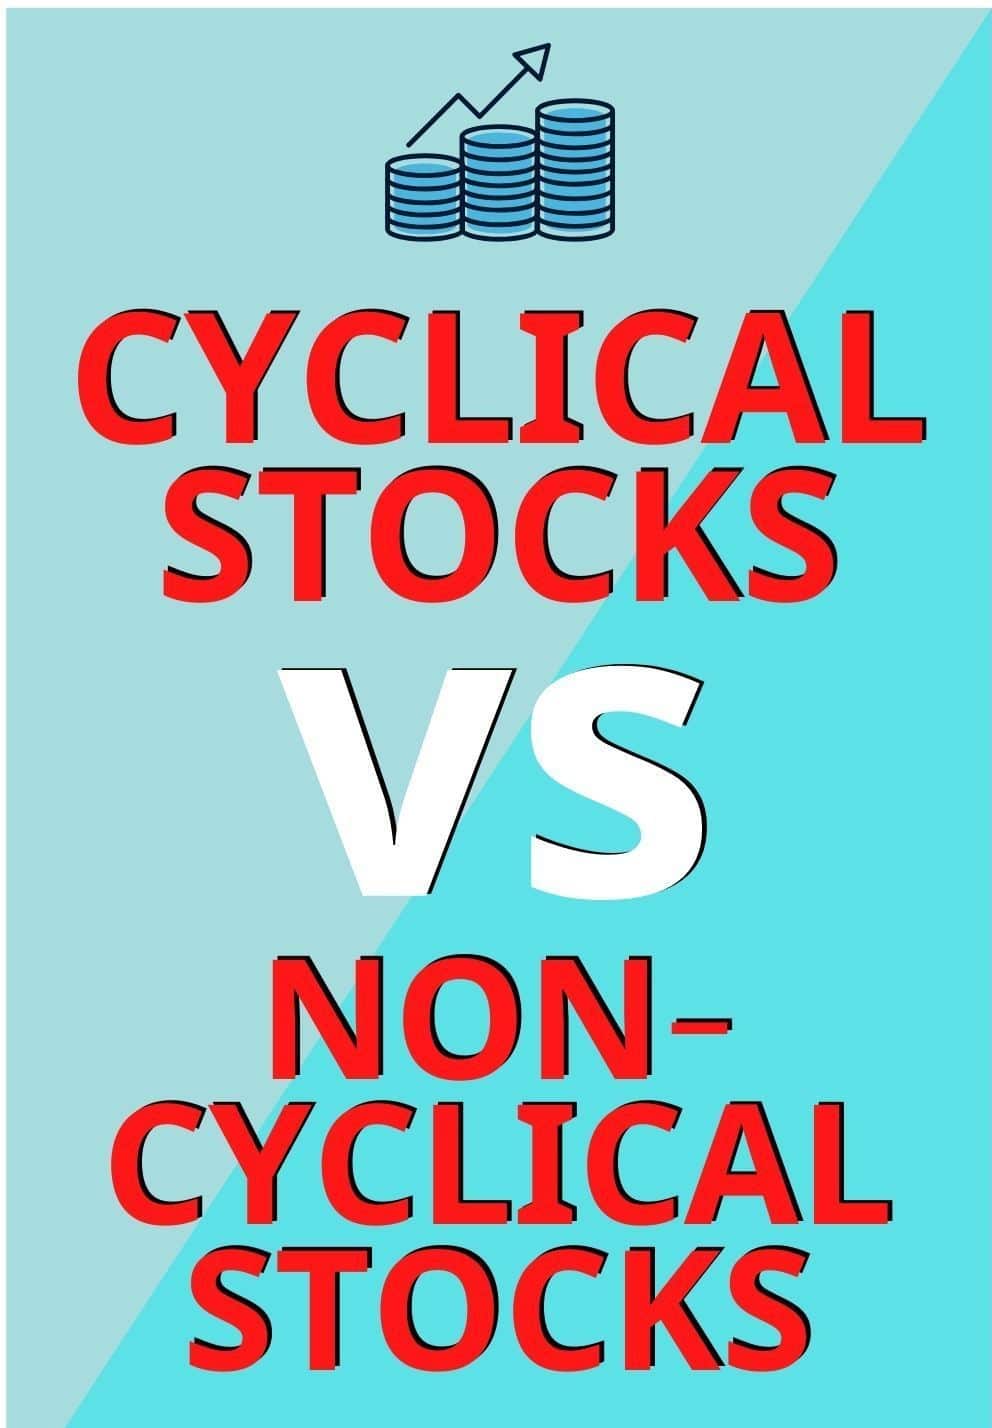 Cyclical And Non-Cyclical Stocks (Determining Nature Of A Stock With Marketxls) - MarketXLS